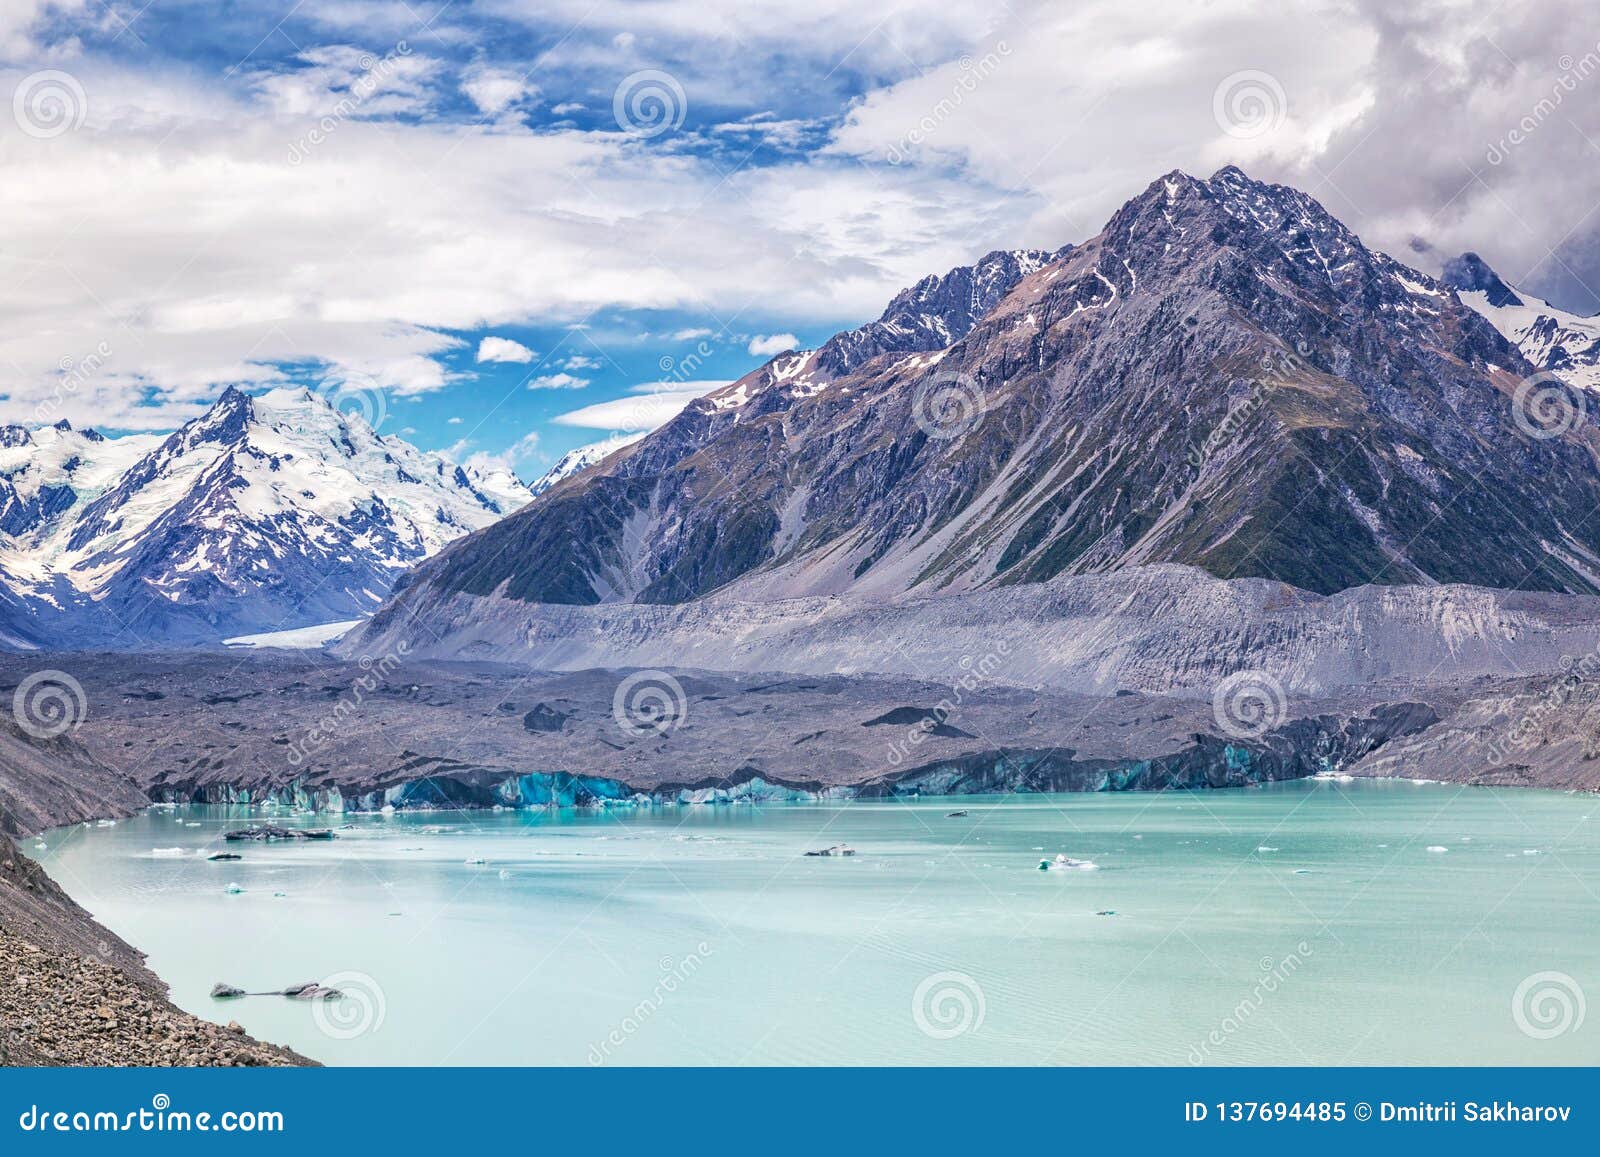 beautiful turqouise tasman glacier lake and rocky mountains in the clouds